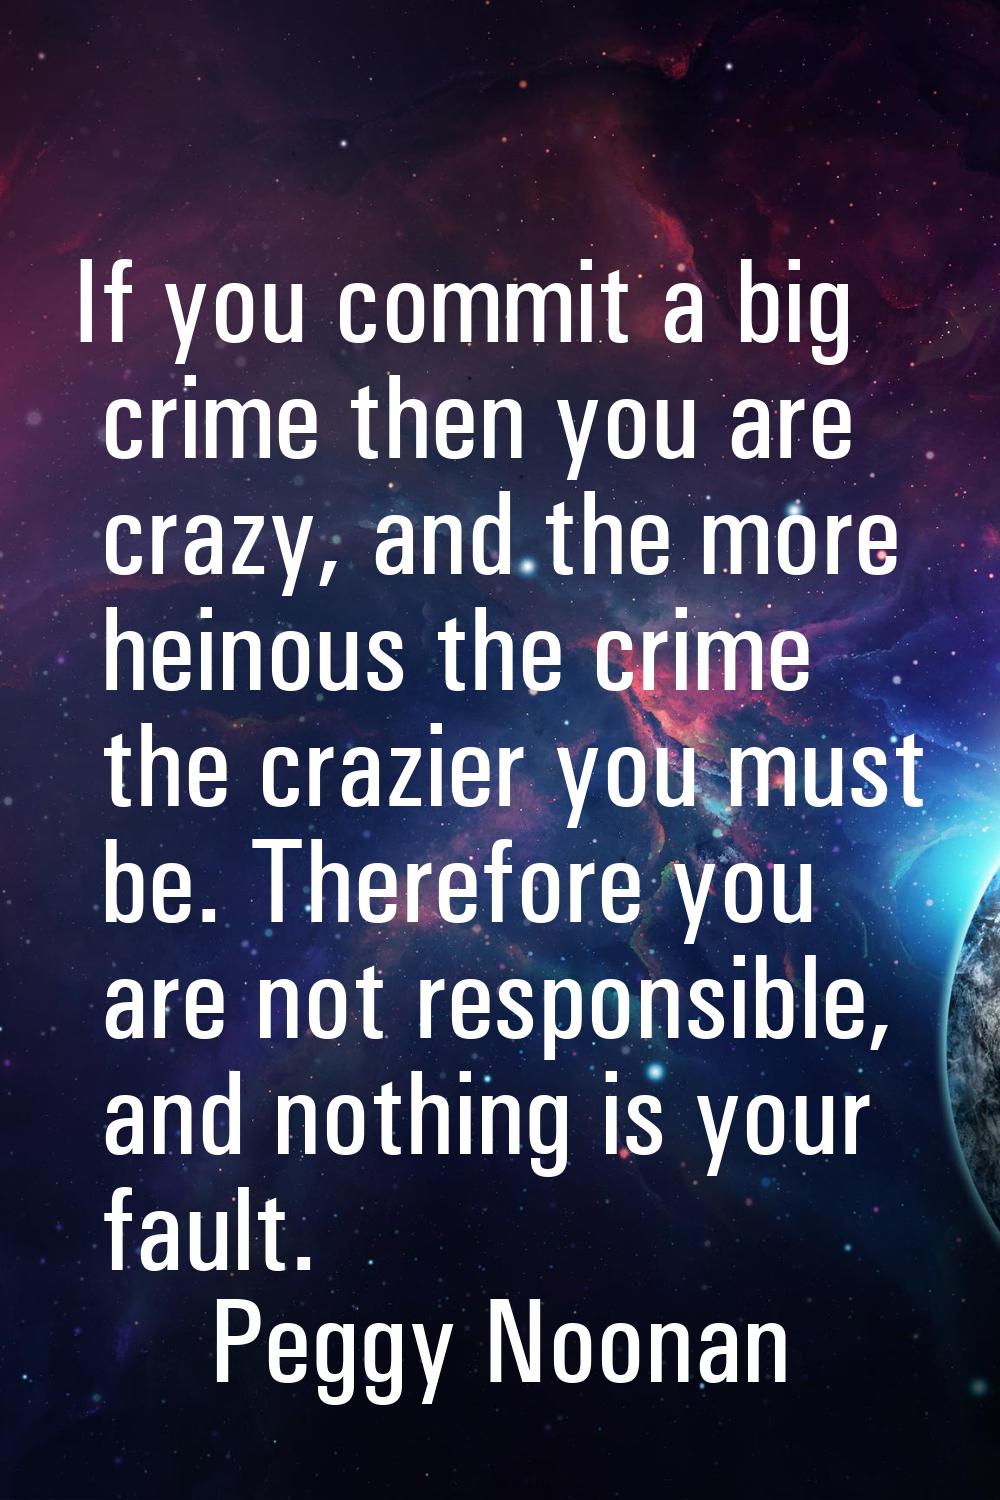 If you commit a big crime then you are crazy, and the more heinous the crime the crazier you must b